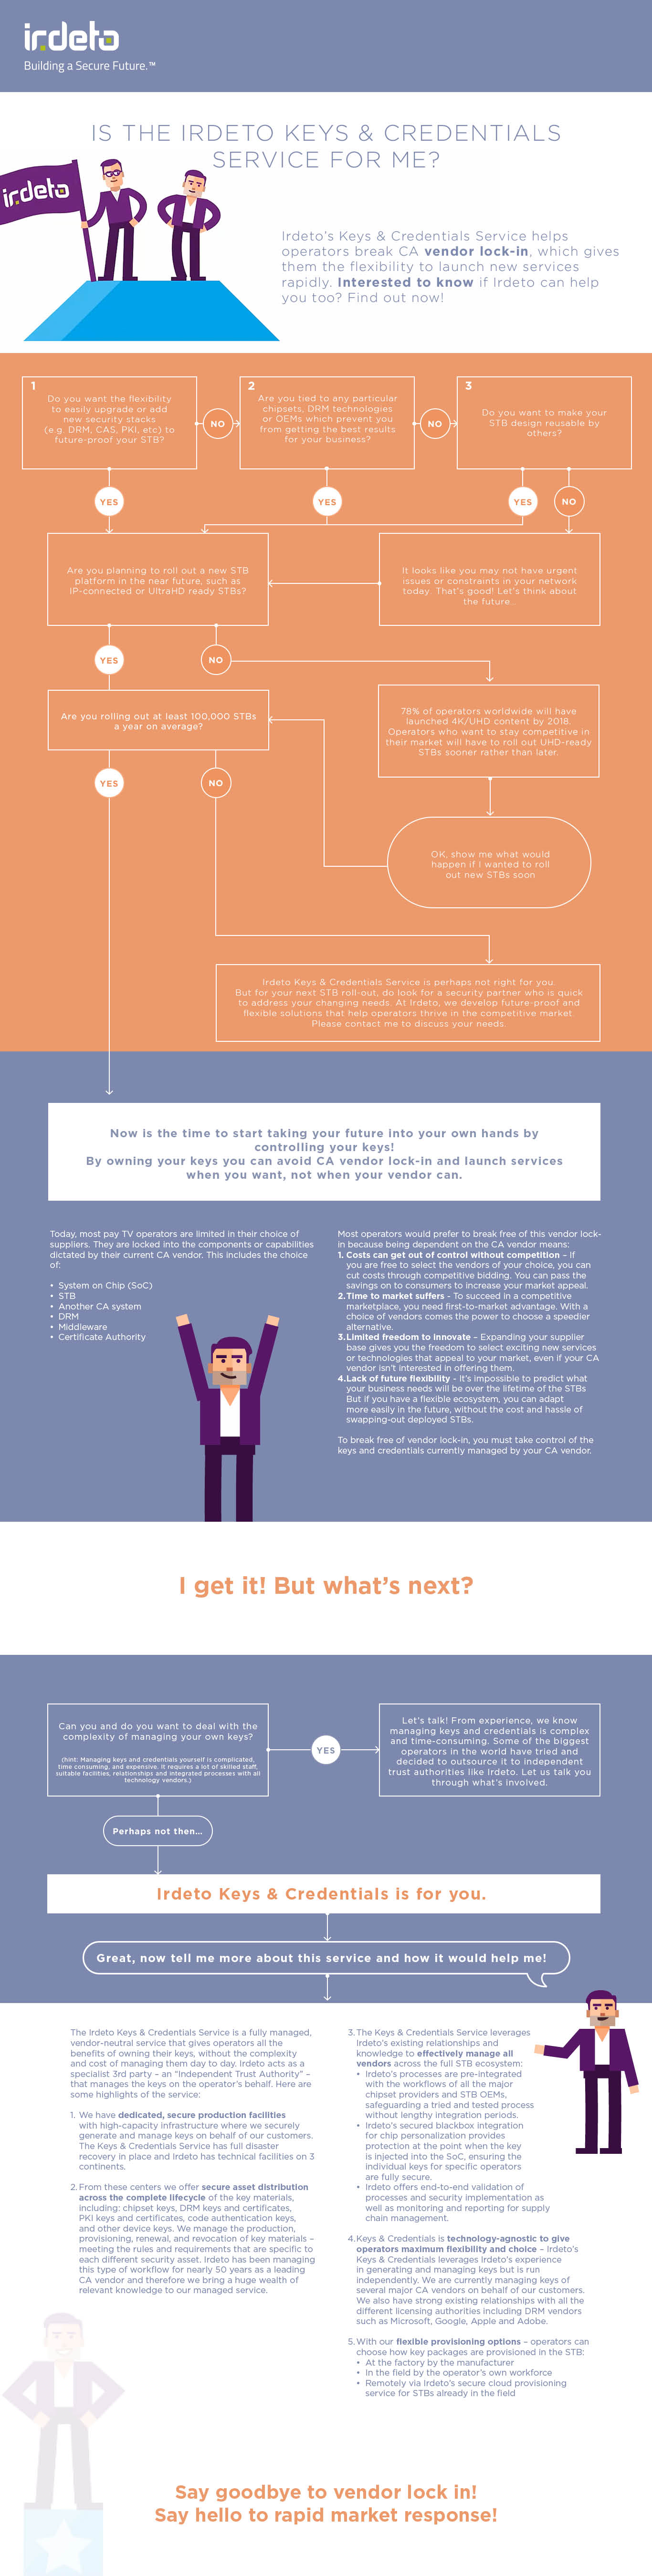 Infographic: Is Keys & Credentials for me?